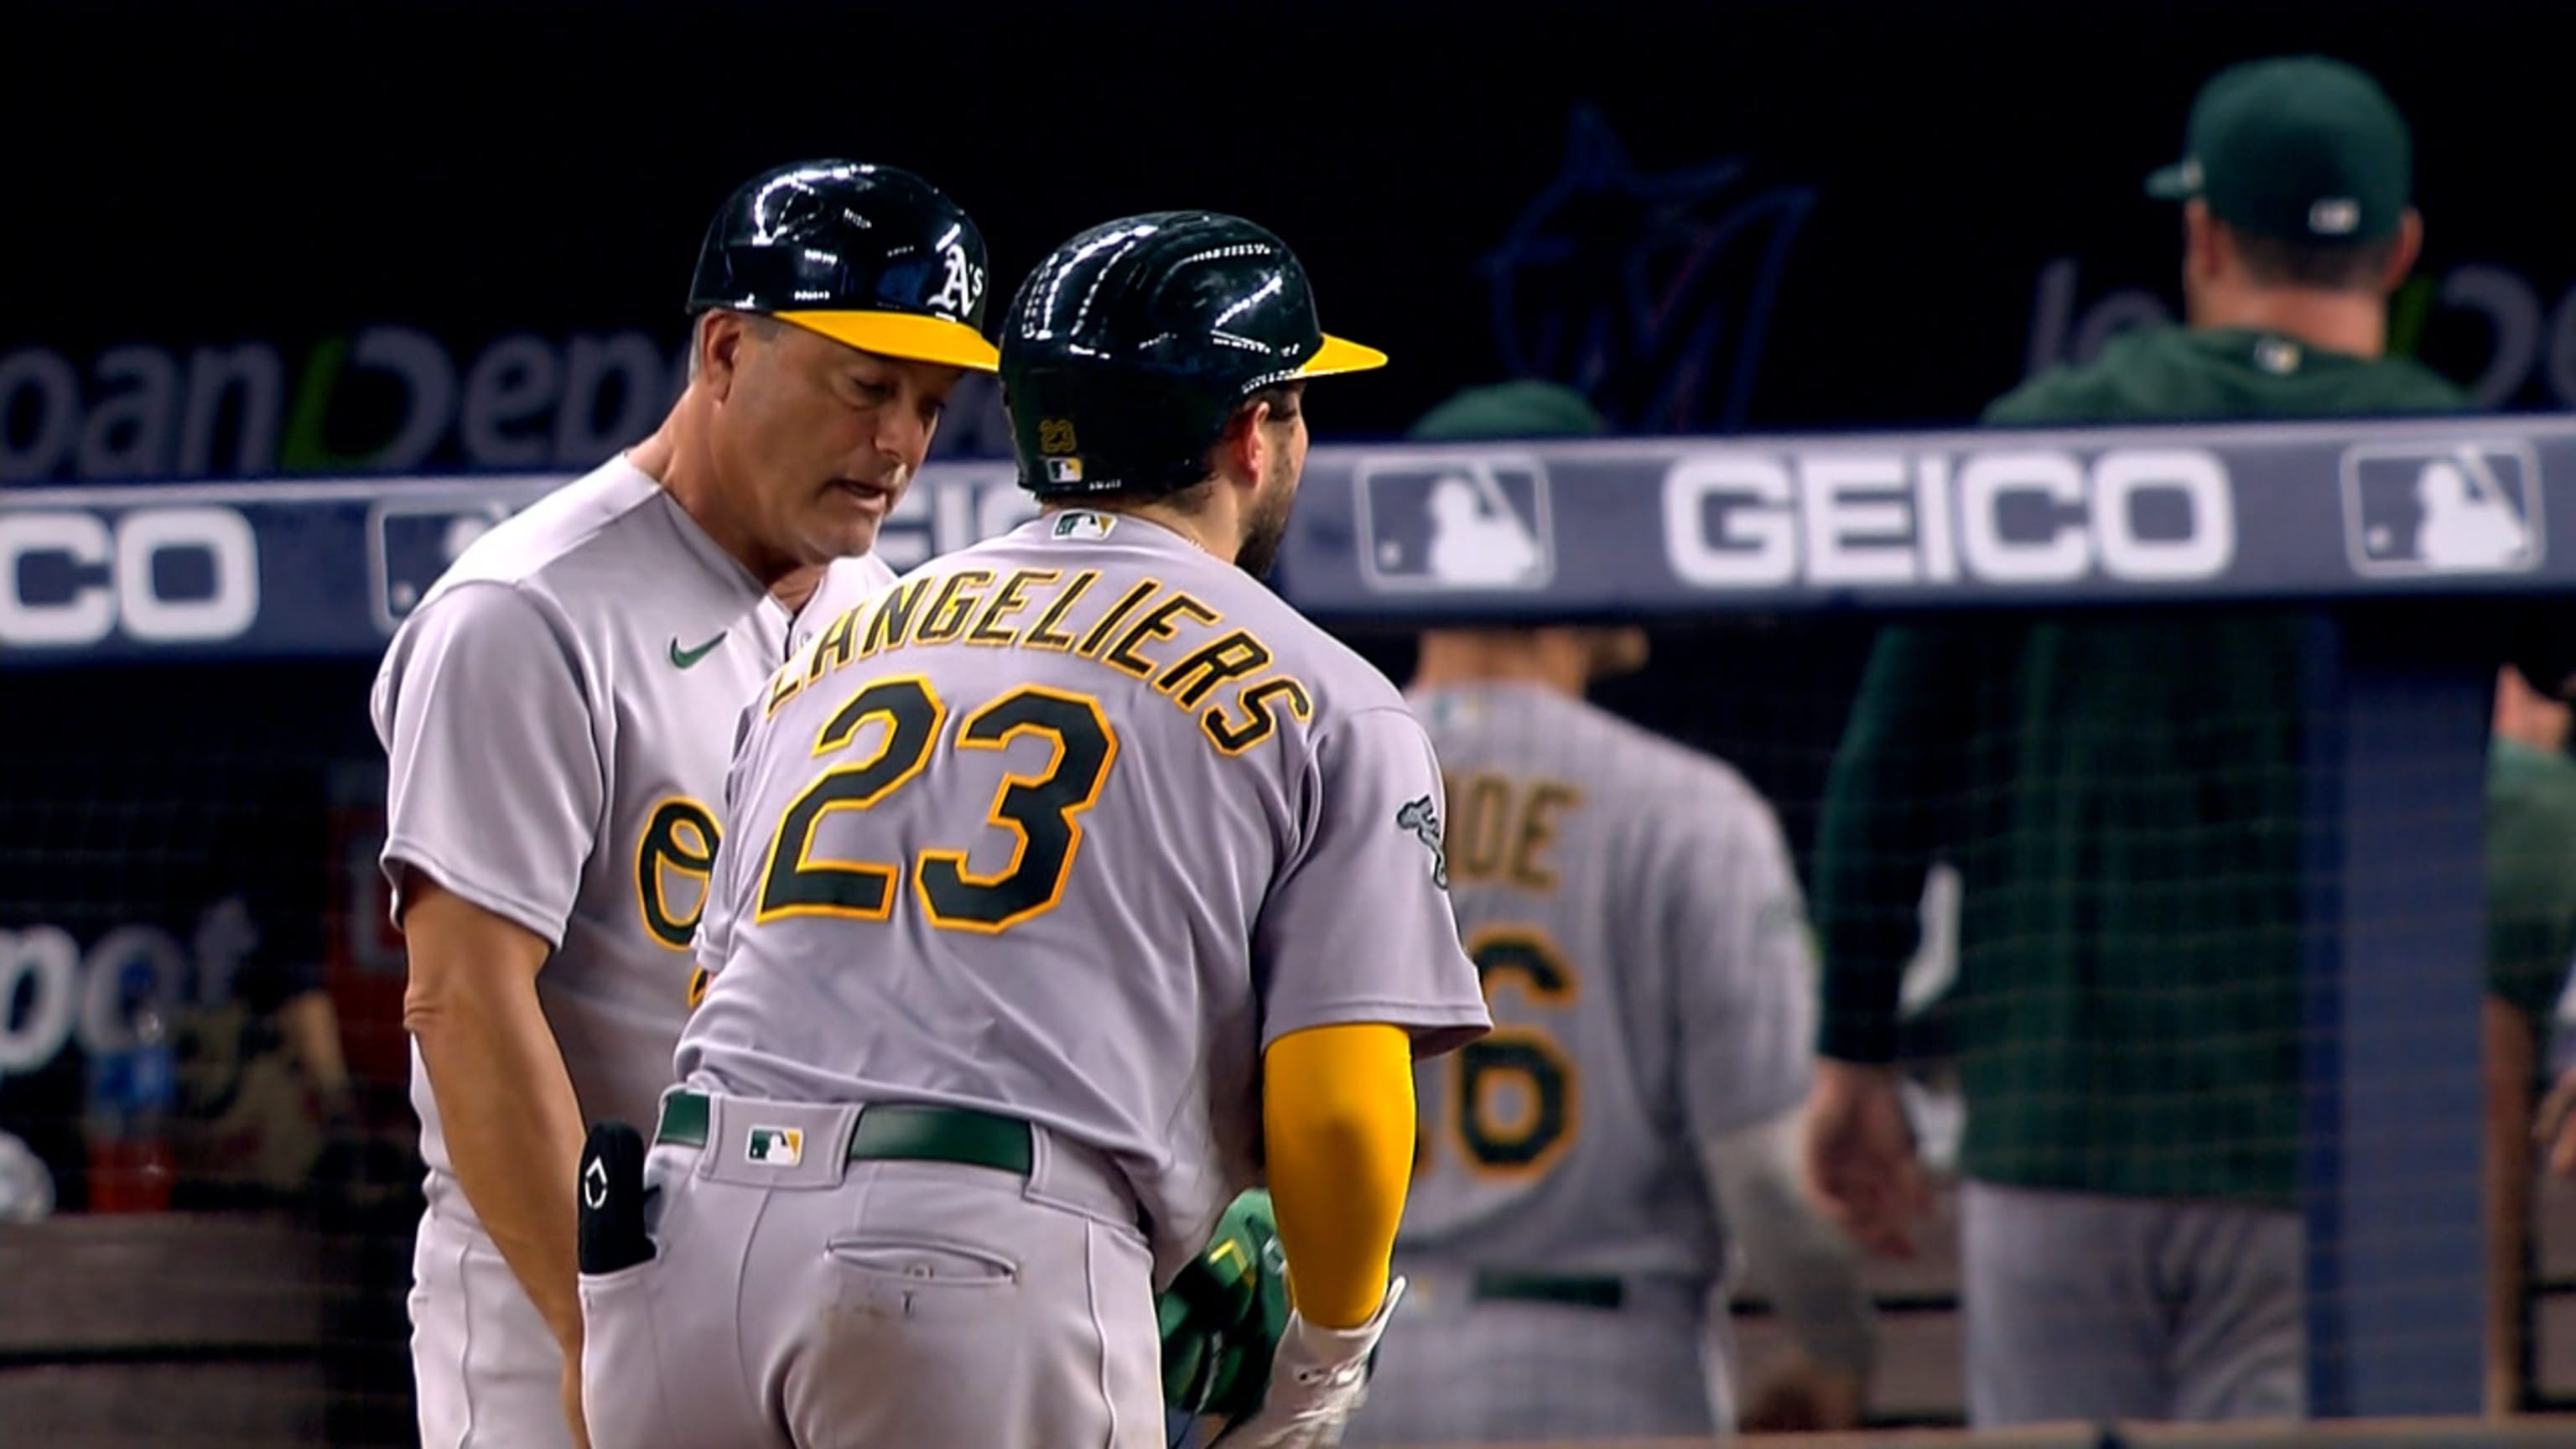 Shea Langeliers' 3-run double sends MLB-worst A's past MLB-best